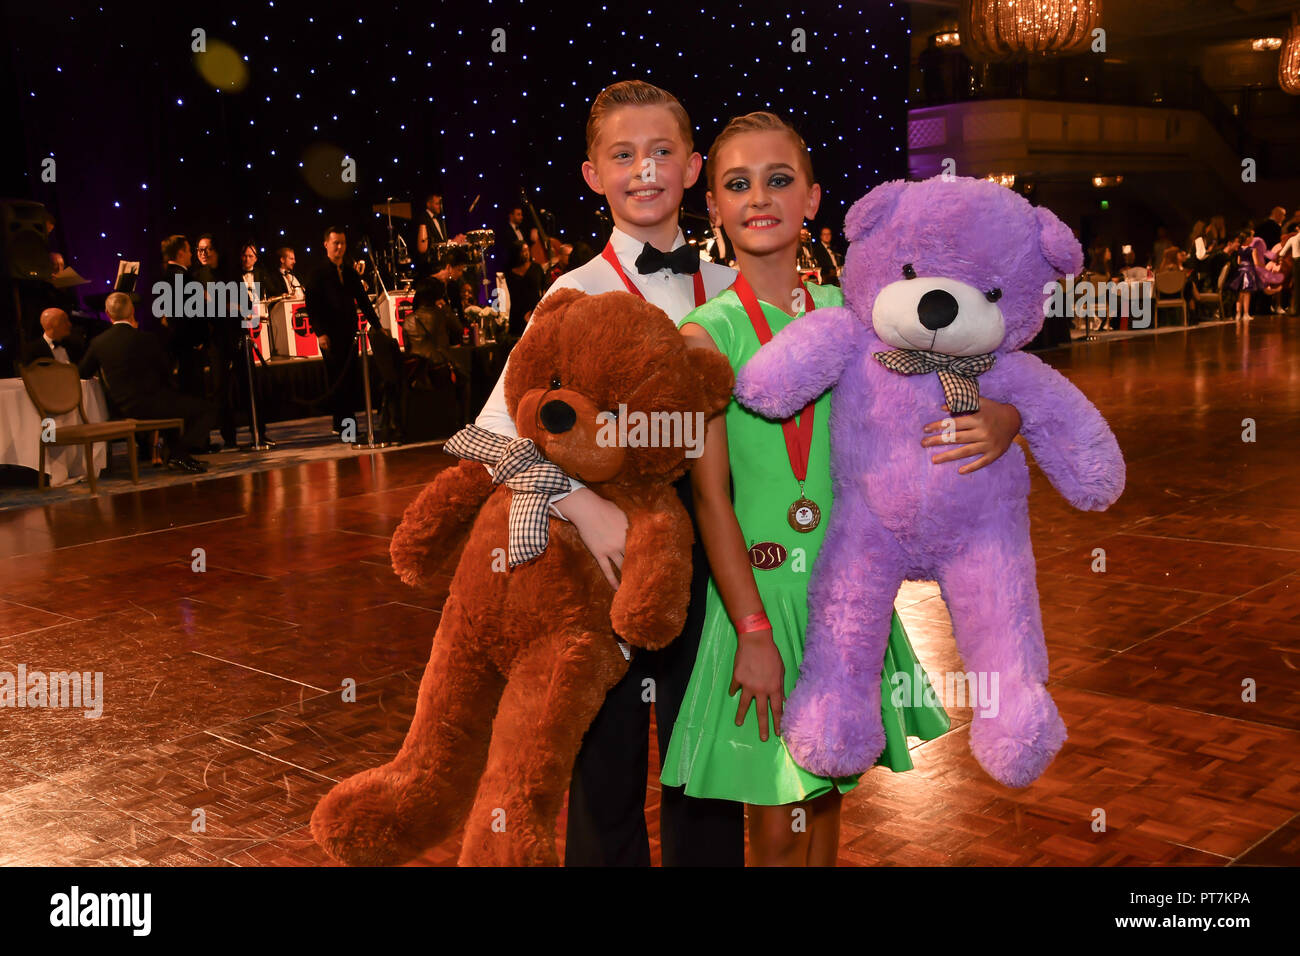 London, UK. 7th Oct 2018. Nathan Storey of Strictly School Dancing Ltd and Olivia Smorga of Nice n Easy - Dance Studios in Bournemouth winner of the Paul Killick - Killick Royale Championships 2018 at The Grosvenor House Hotel, London, UK. 7 October 2018. Credit: Picture Capital/Alamy Live News Stock Photo